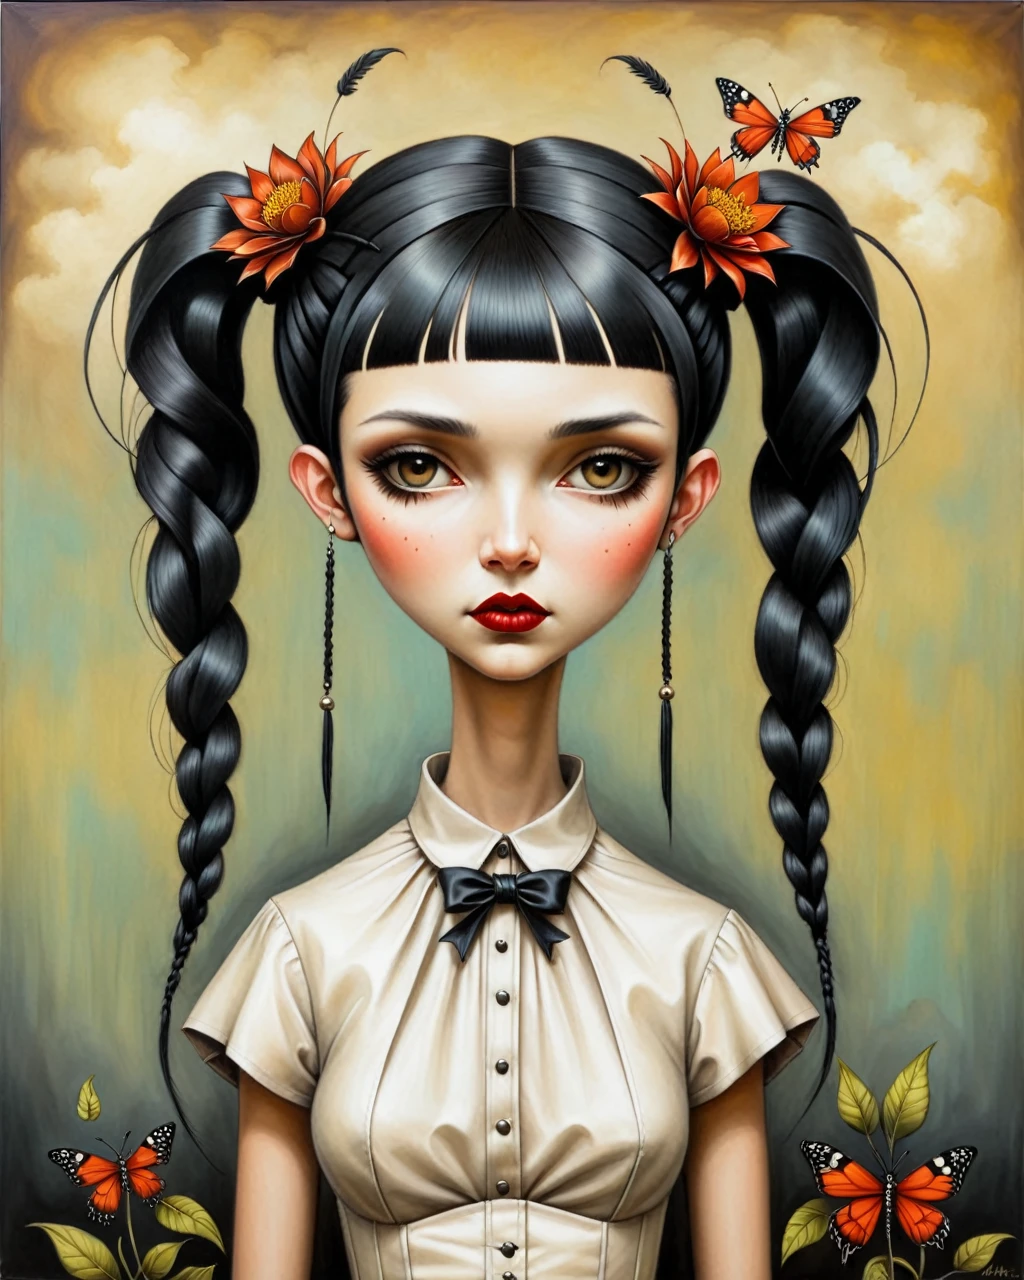 origami style in the style of حاول أندروز,حاول أندروز style,حاول أندروز art,حاول أندروزa painting of a girl gothic wednesday addams pale black hair two braids style of حاول أندروز, أندروز إيساو آرت ستايل, inspired بواسطة عيسو أندروز, حاول أندروز ornate, بواسطة عيسو أندروز, حاول أندروز, inspired بواسطة ESAO, بواسطة ESAO,  إيرلي, shrubs and flowers حاول أندروز, بنيامين لاكومب, 1فتاة, bug in the style of حاول أندروز, حاول أندروز . فن الورق, ورق مطوي, مطوية, فن اوريغامي, الطيات, قطع وأضعاف, تركيبة مركزة